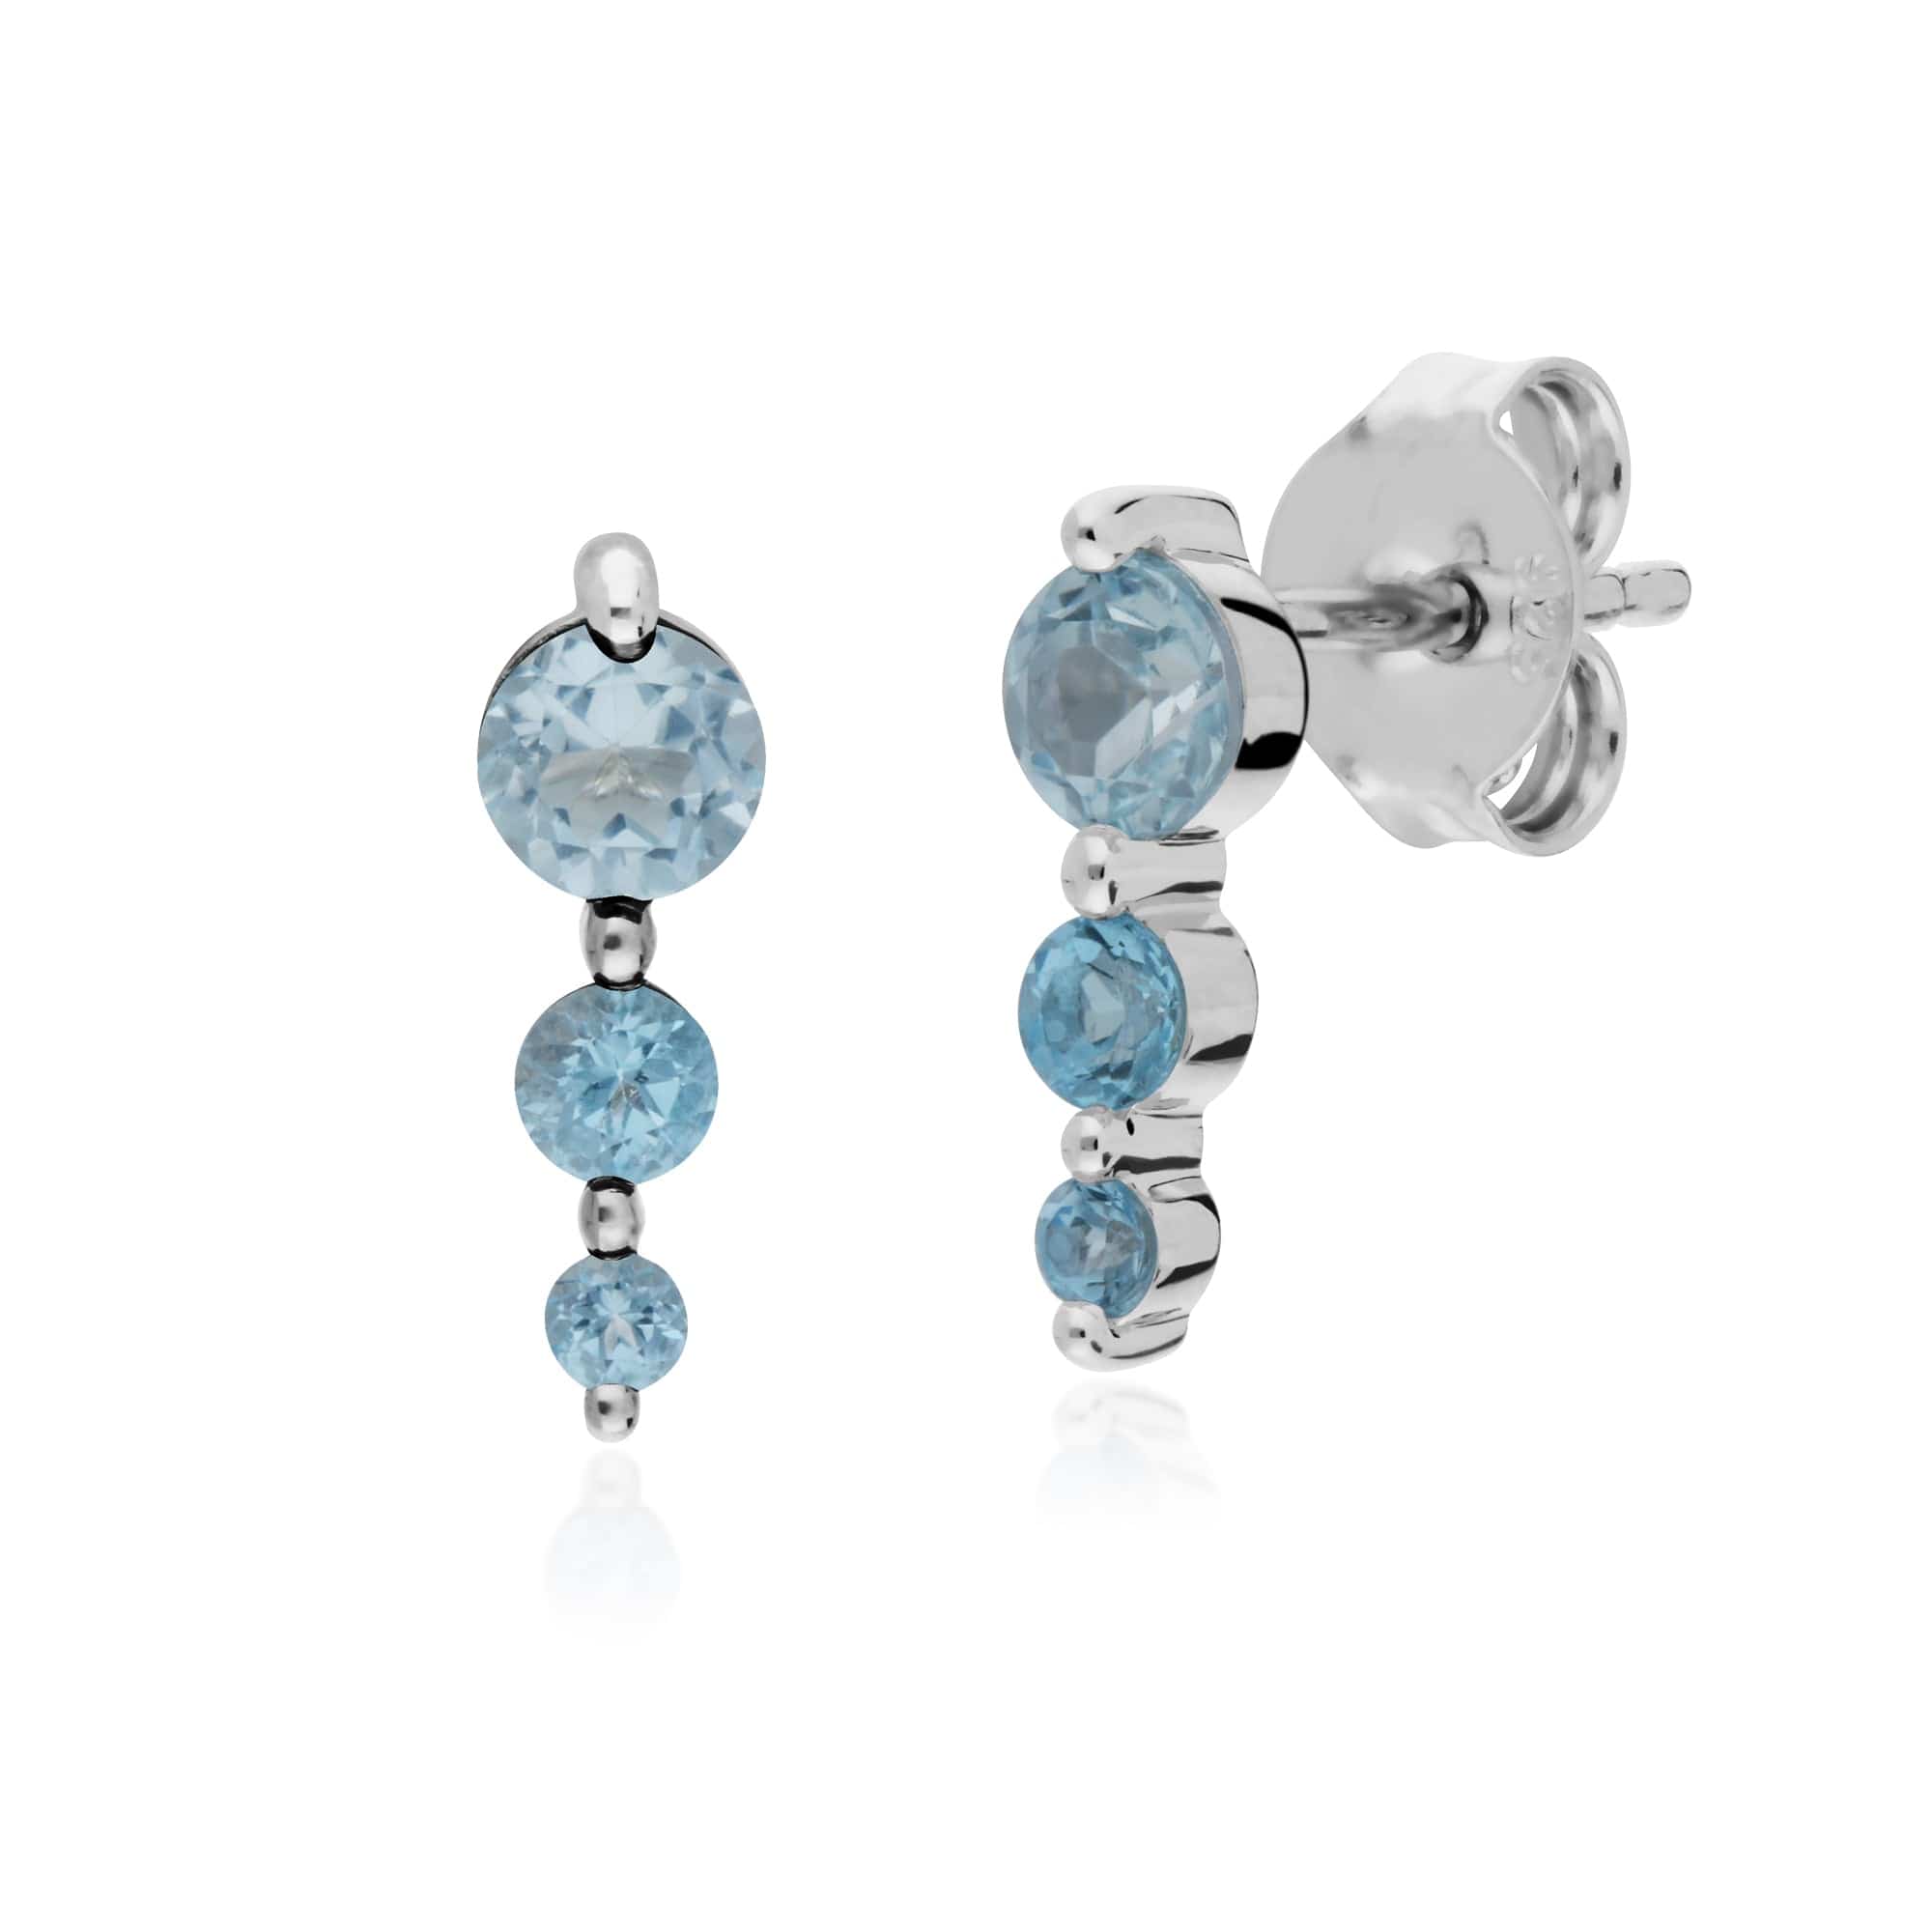 270E025501925-270R056001925 Classic Round Blue Topaz Three Stone Gradient Earrings & Ring Set in 925 Sterling Silver 2